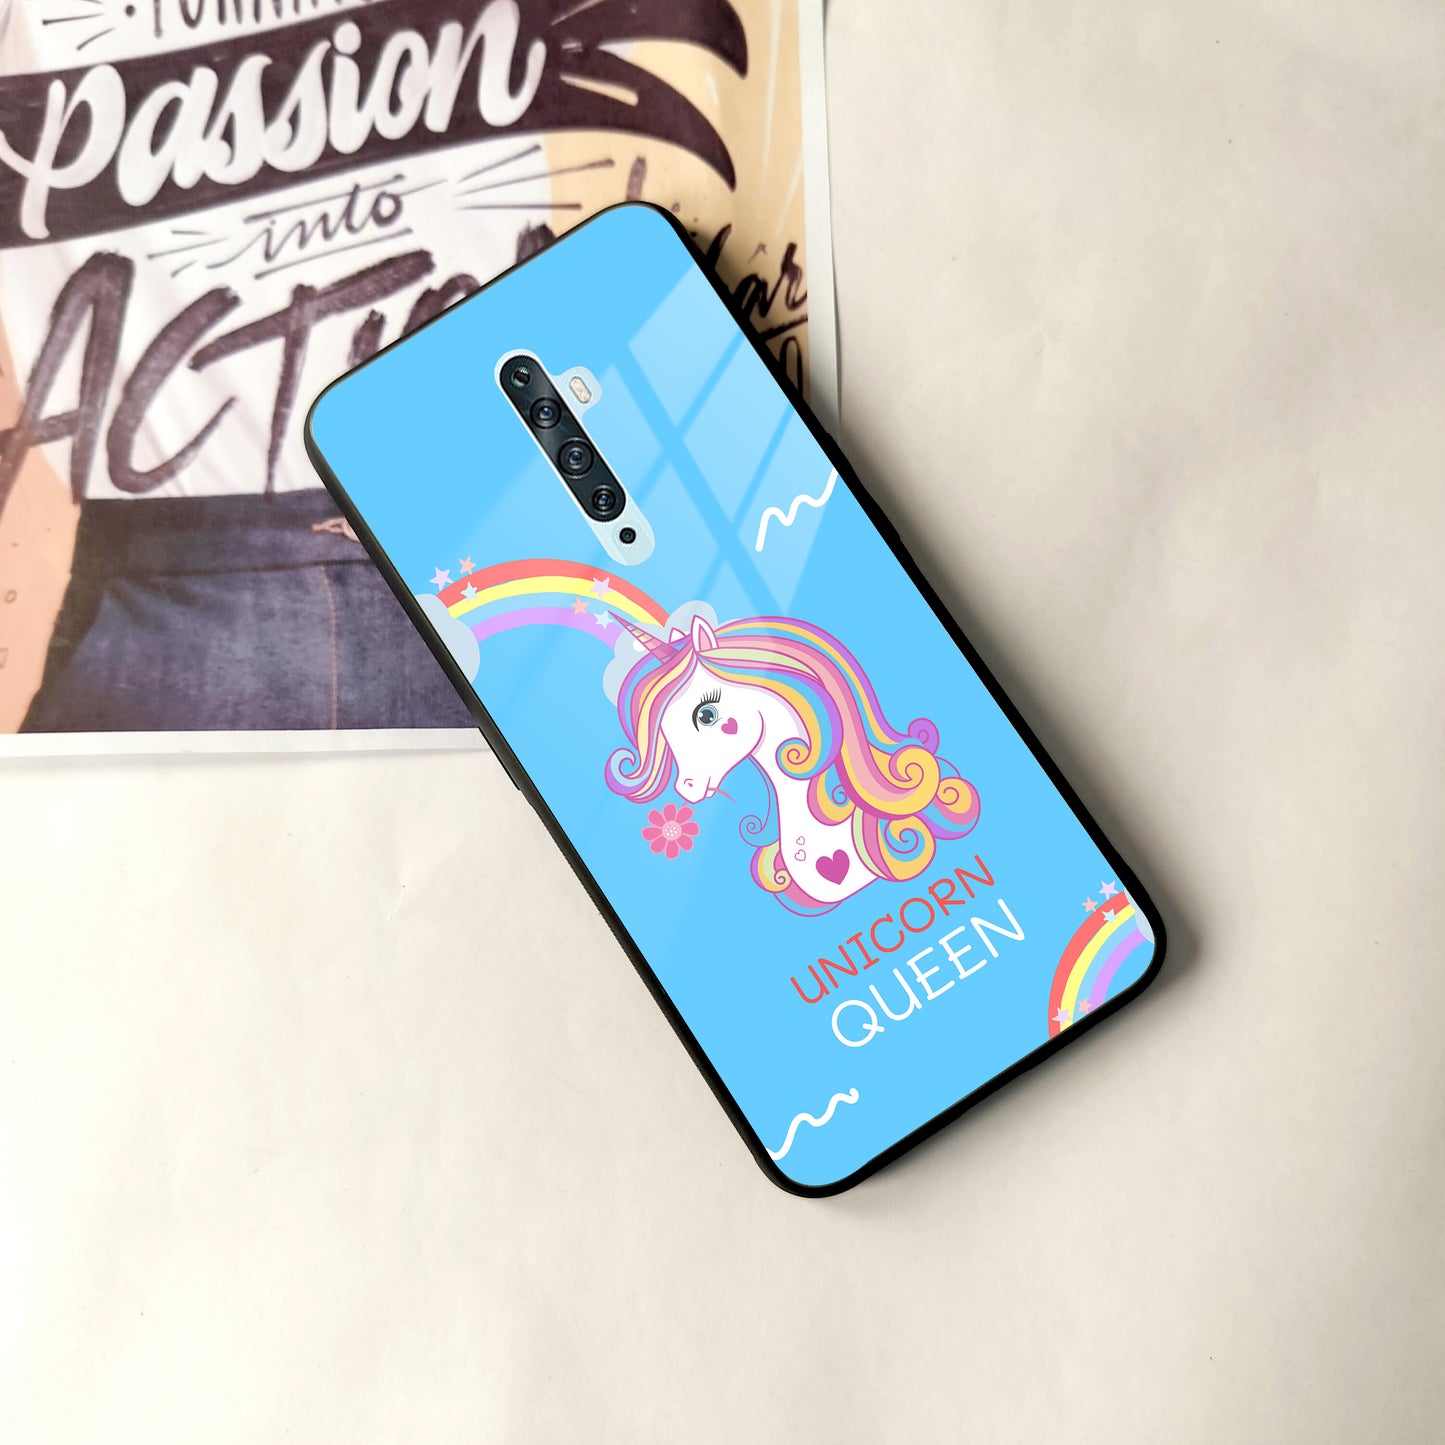 Blue Unicorn Queen Glass Phone Case For Oppo